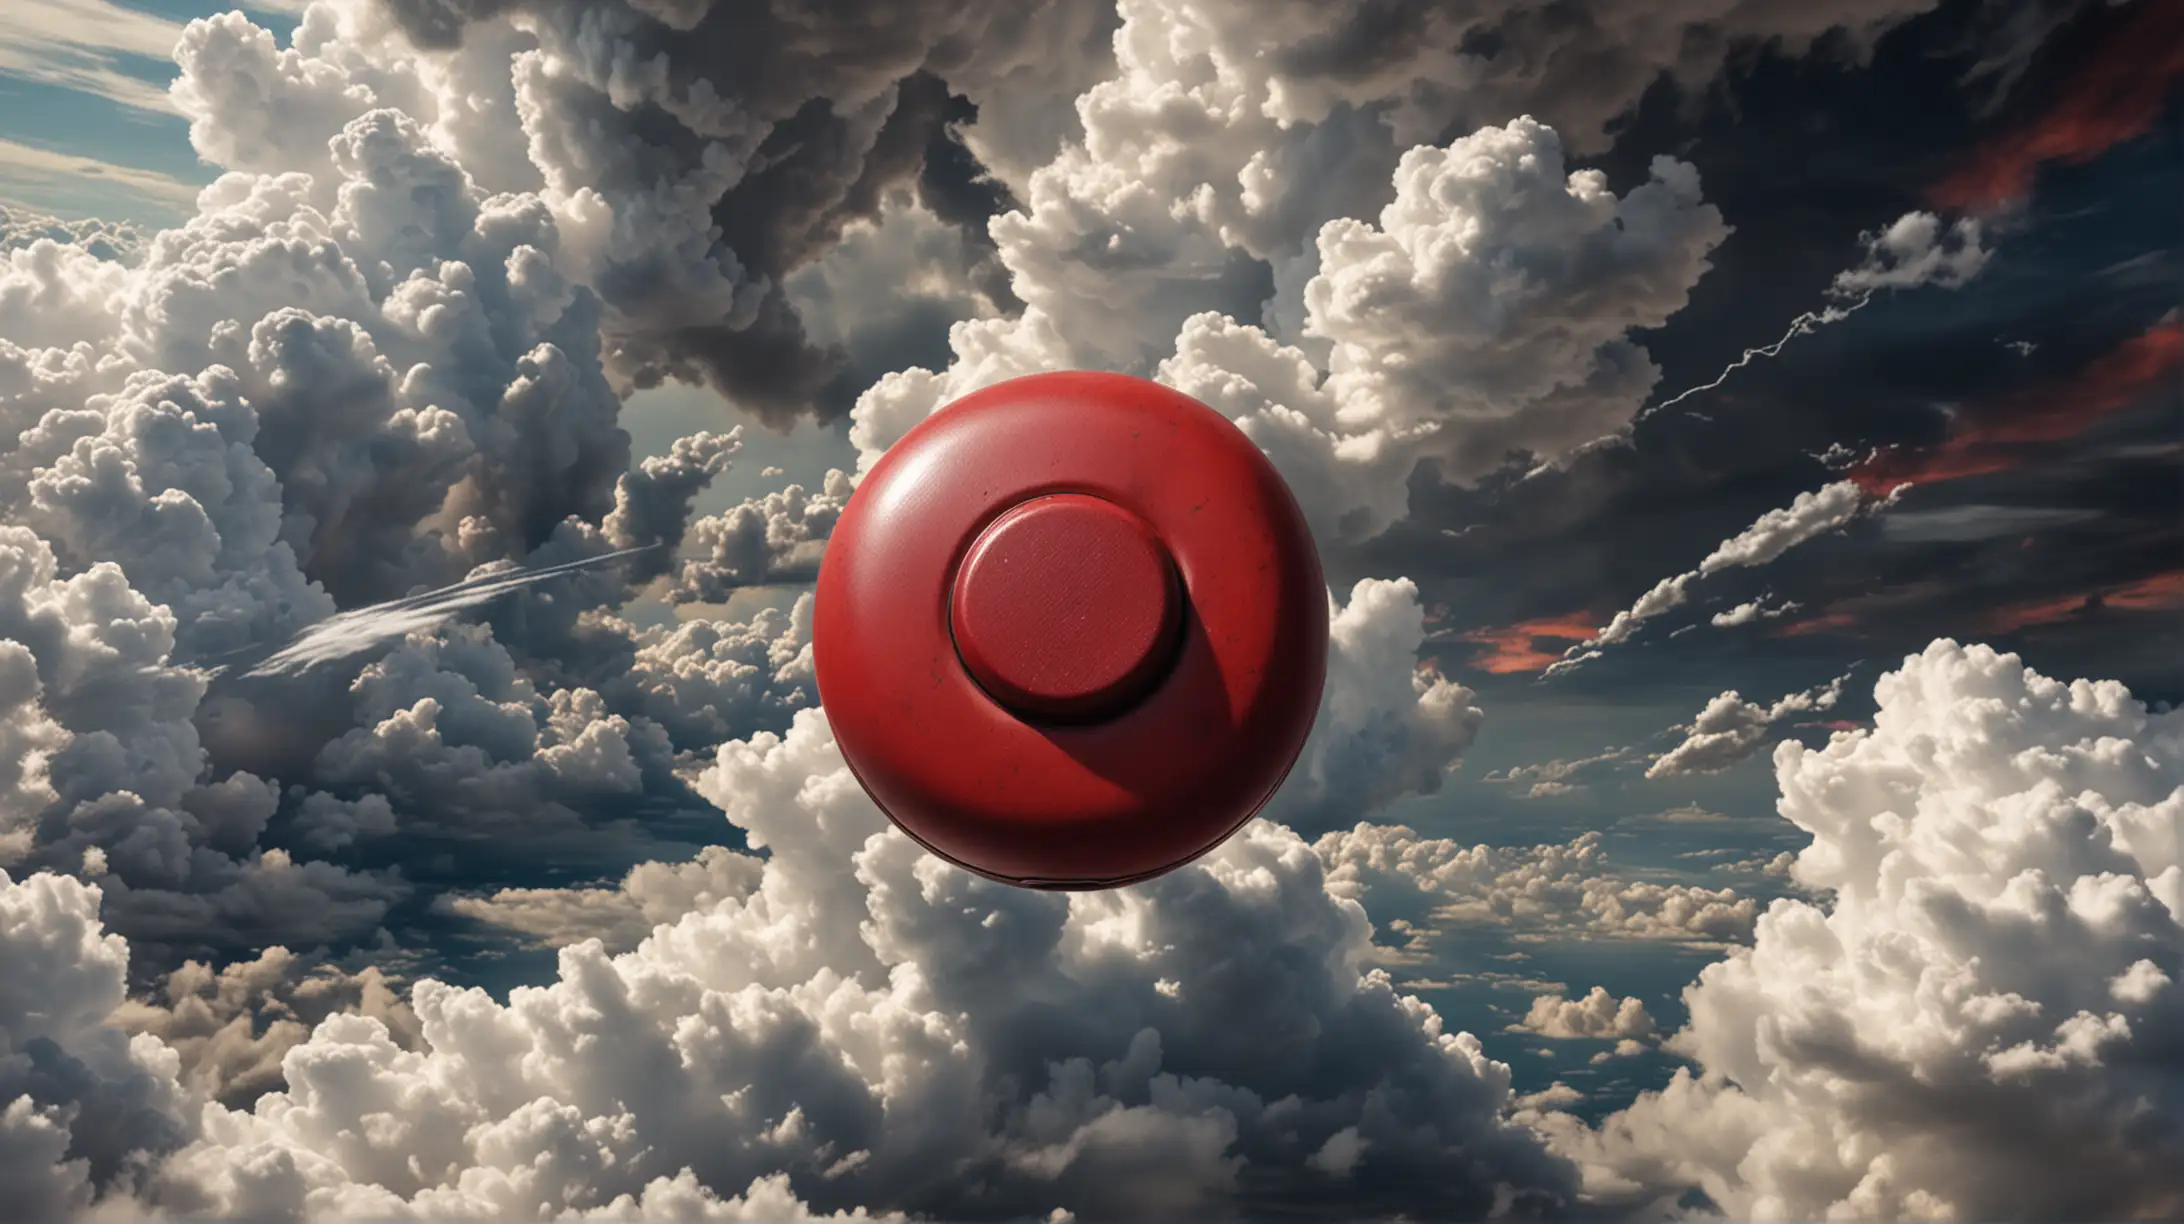 hyper realistic over head shot looking down of a big red button on the arm of romanchair with heaven clouds in the deep background

